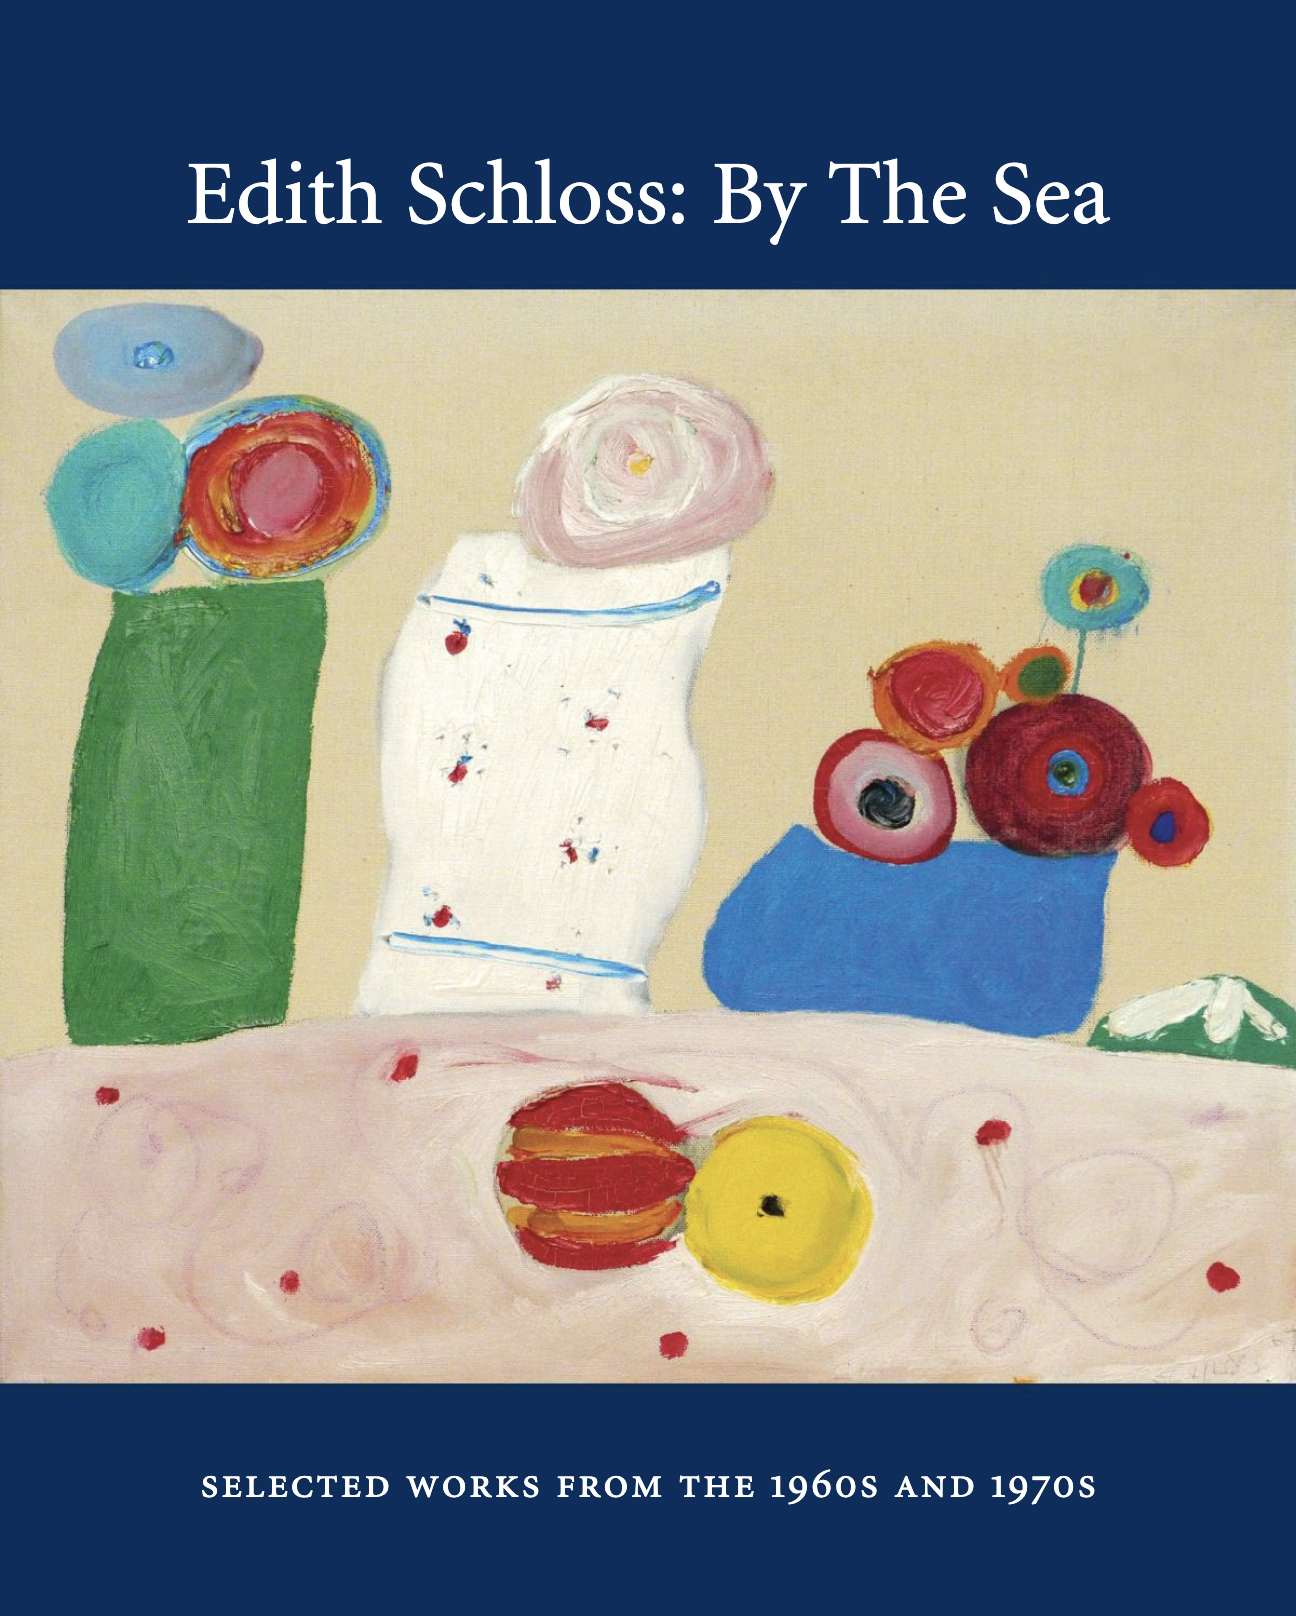 Edith Schloss: By the Sea # Selected Works from # the 1960s and 1970s # 2018 &lt;alt="Catalogue cover with title and an multicolor abstract still life of flowers in vases"&gt; 